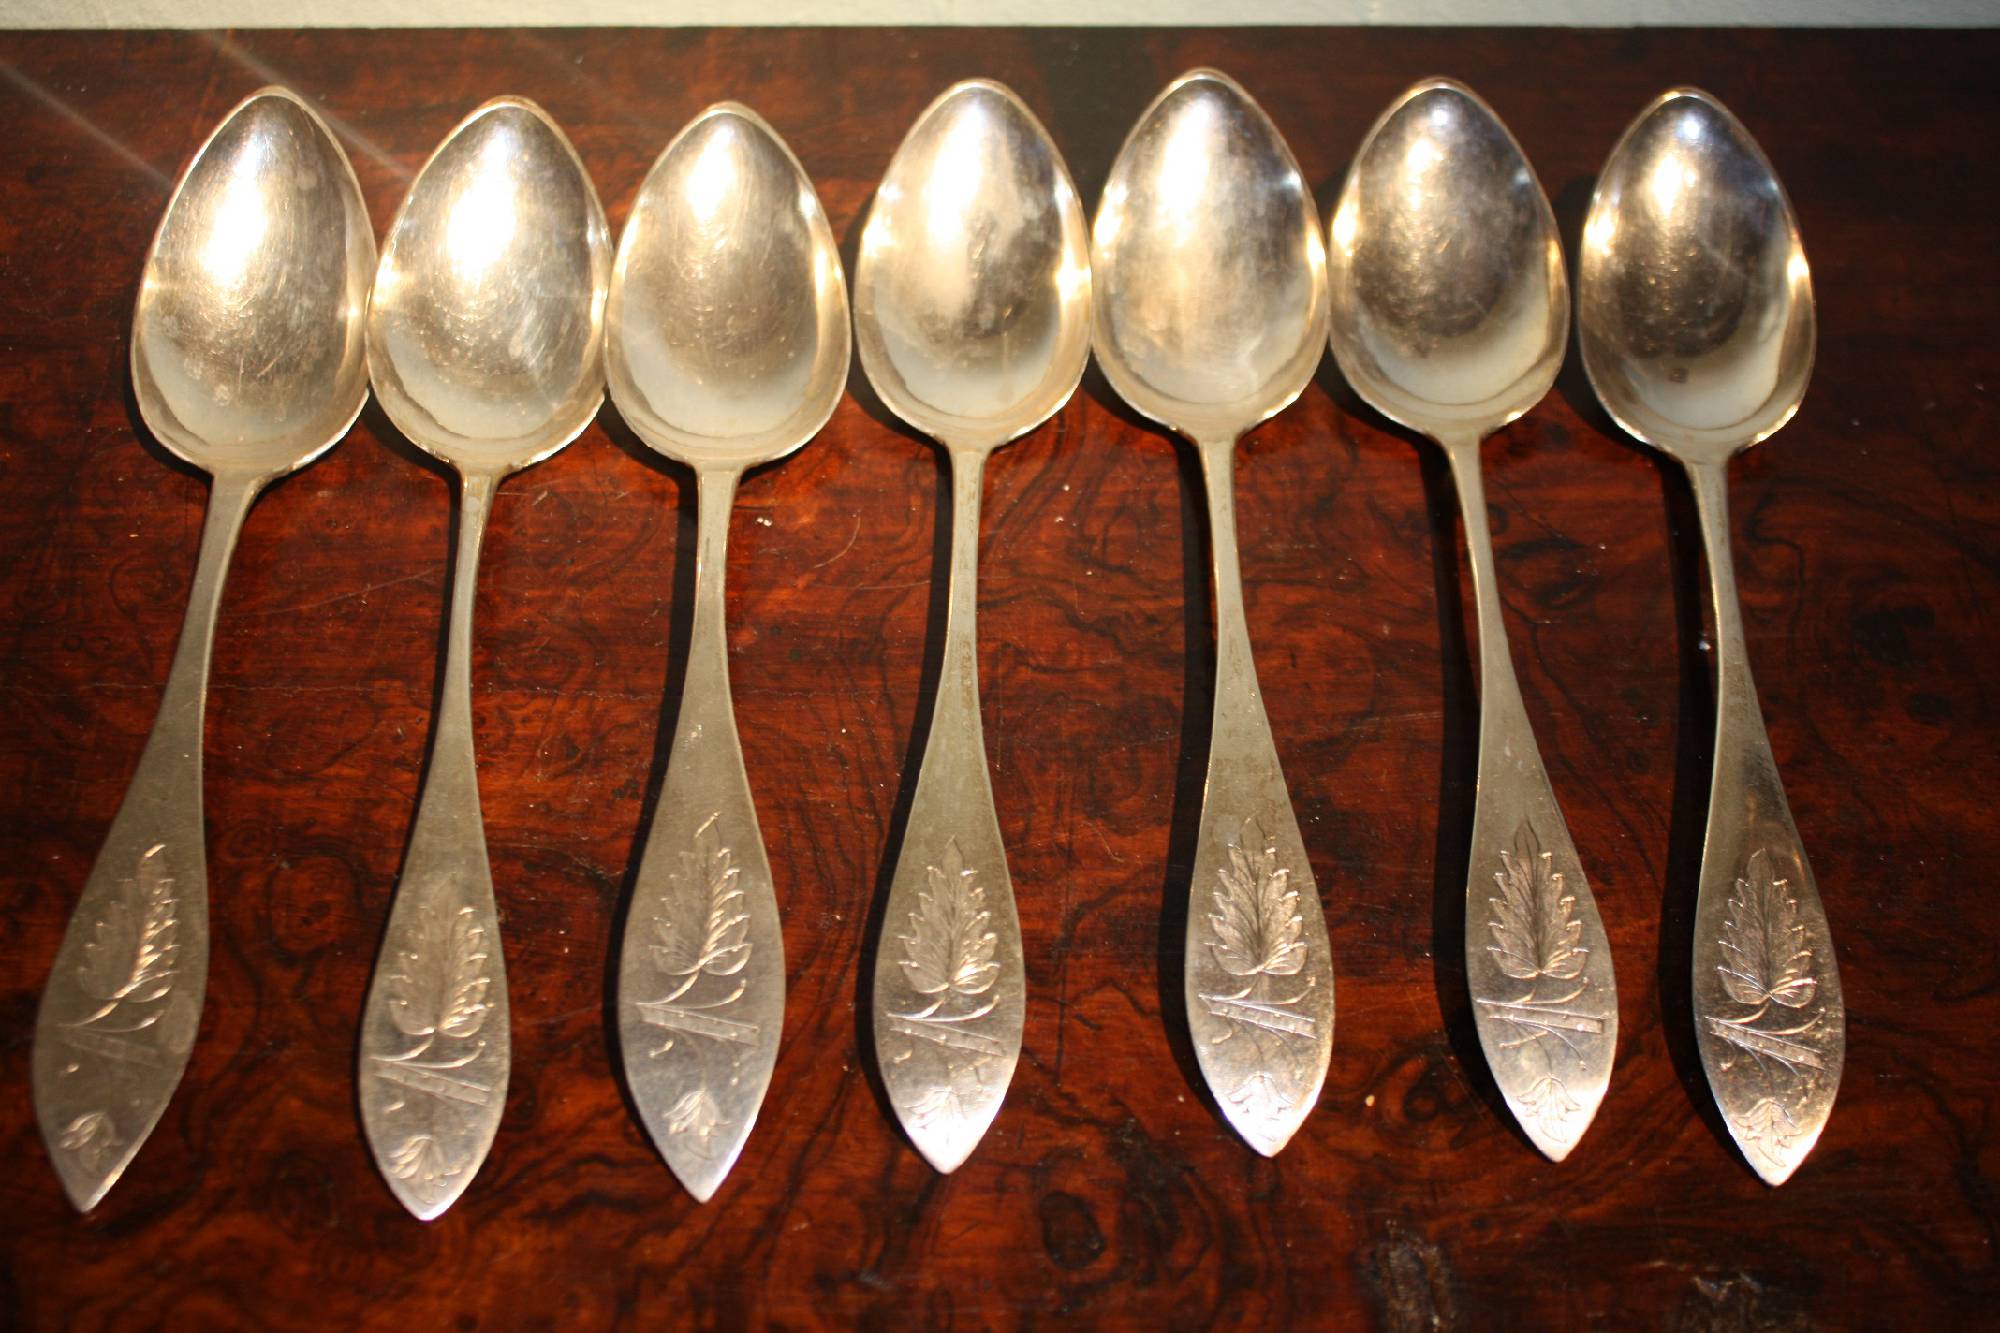 7 antique 1830 made silver spoons, marked with 13 Lot(835-812.5/1000) and the hallmark of the town of Leer, Germany